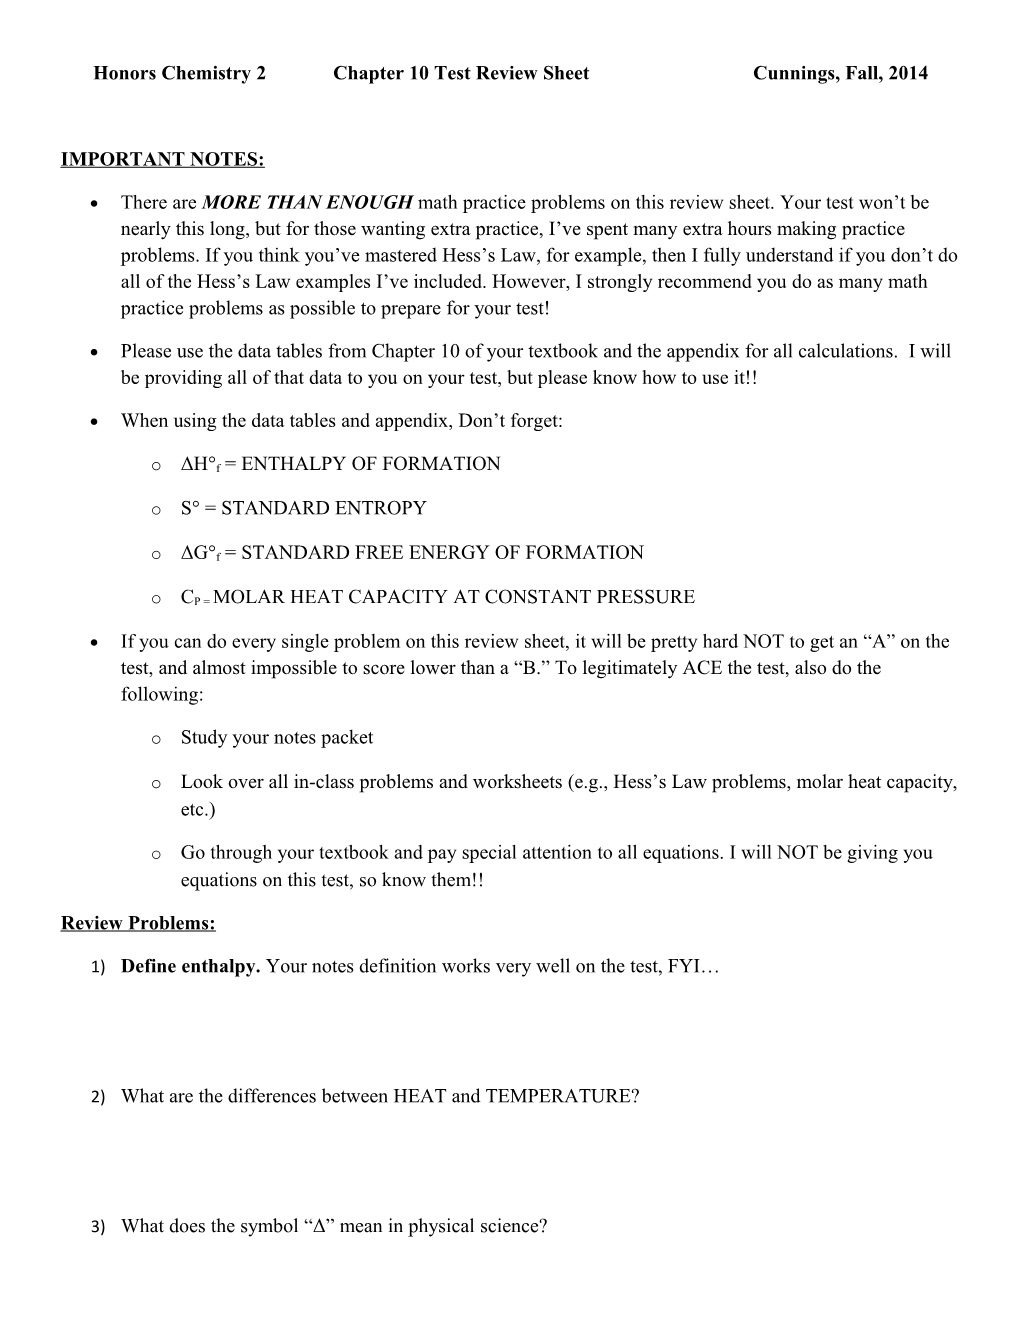 Honors Chemistry 2 Chapter 10 Test Review Sheet Cunnings, Fall, 2014